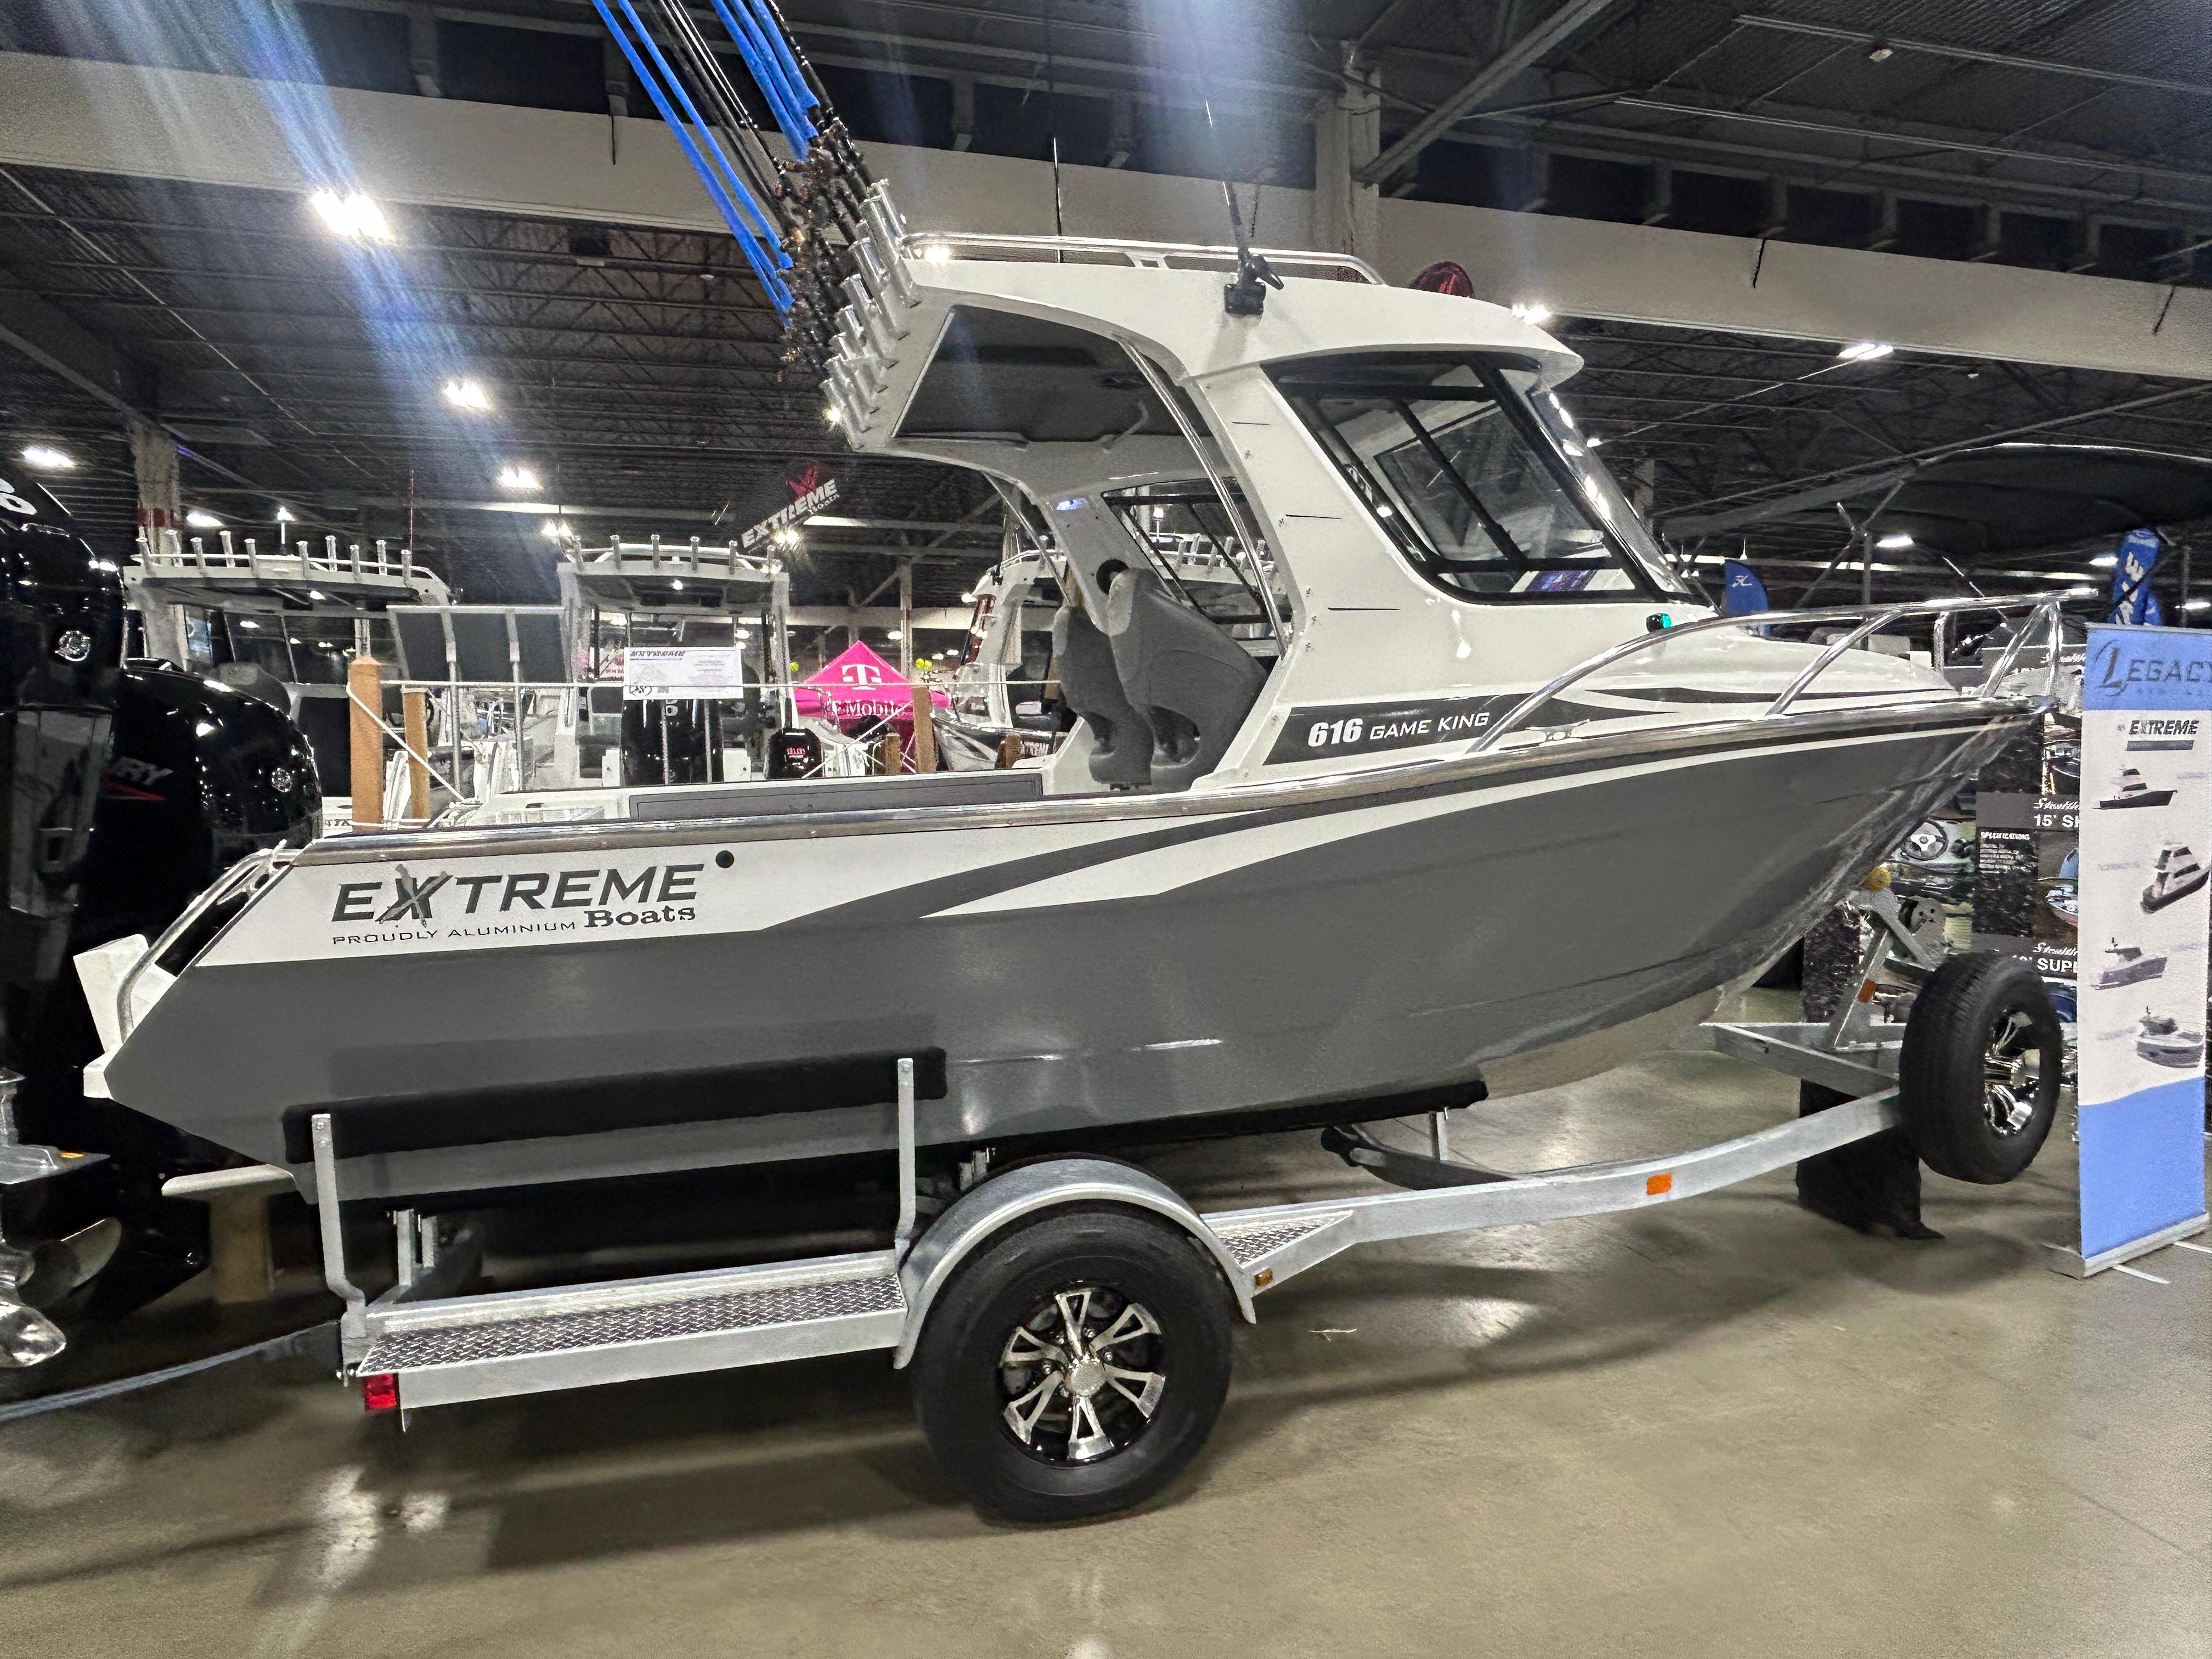 New 2024 Extreme Boats 616 Game King 21'